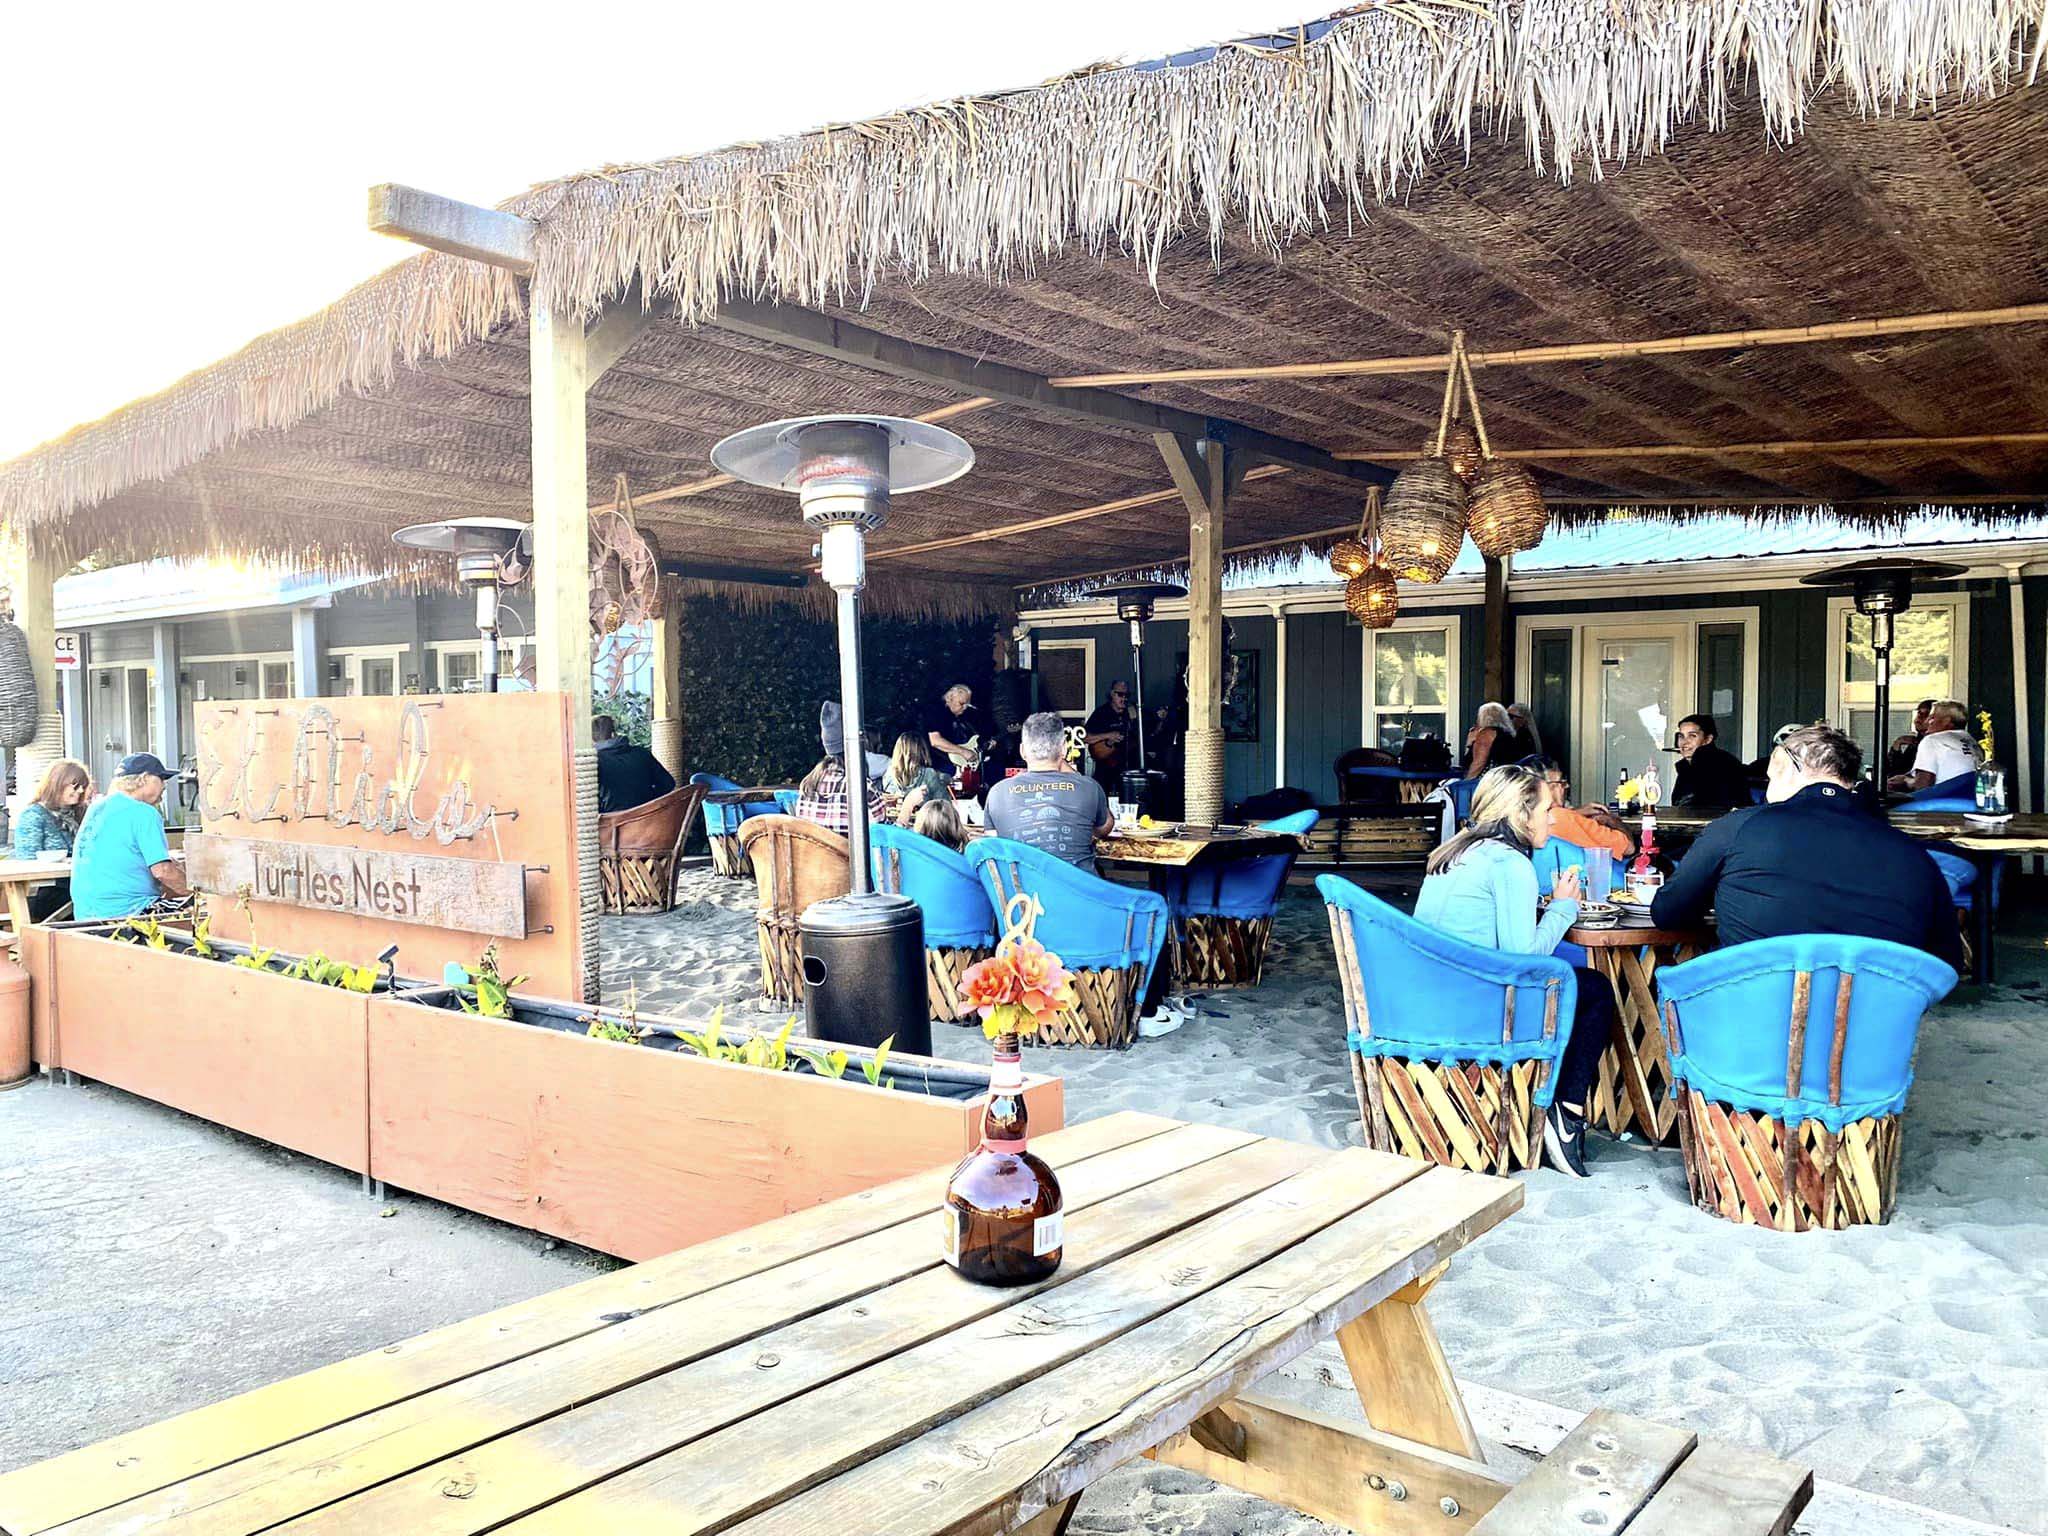 Outdoor-Dining-Area-with-People-Tortuga-Mexican-Bar-and-Grill-Gold-Beach-Oregon.jpg